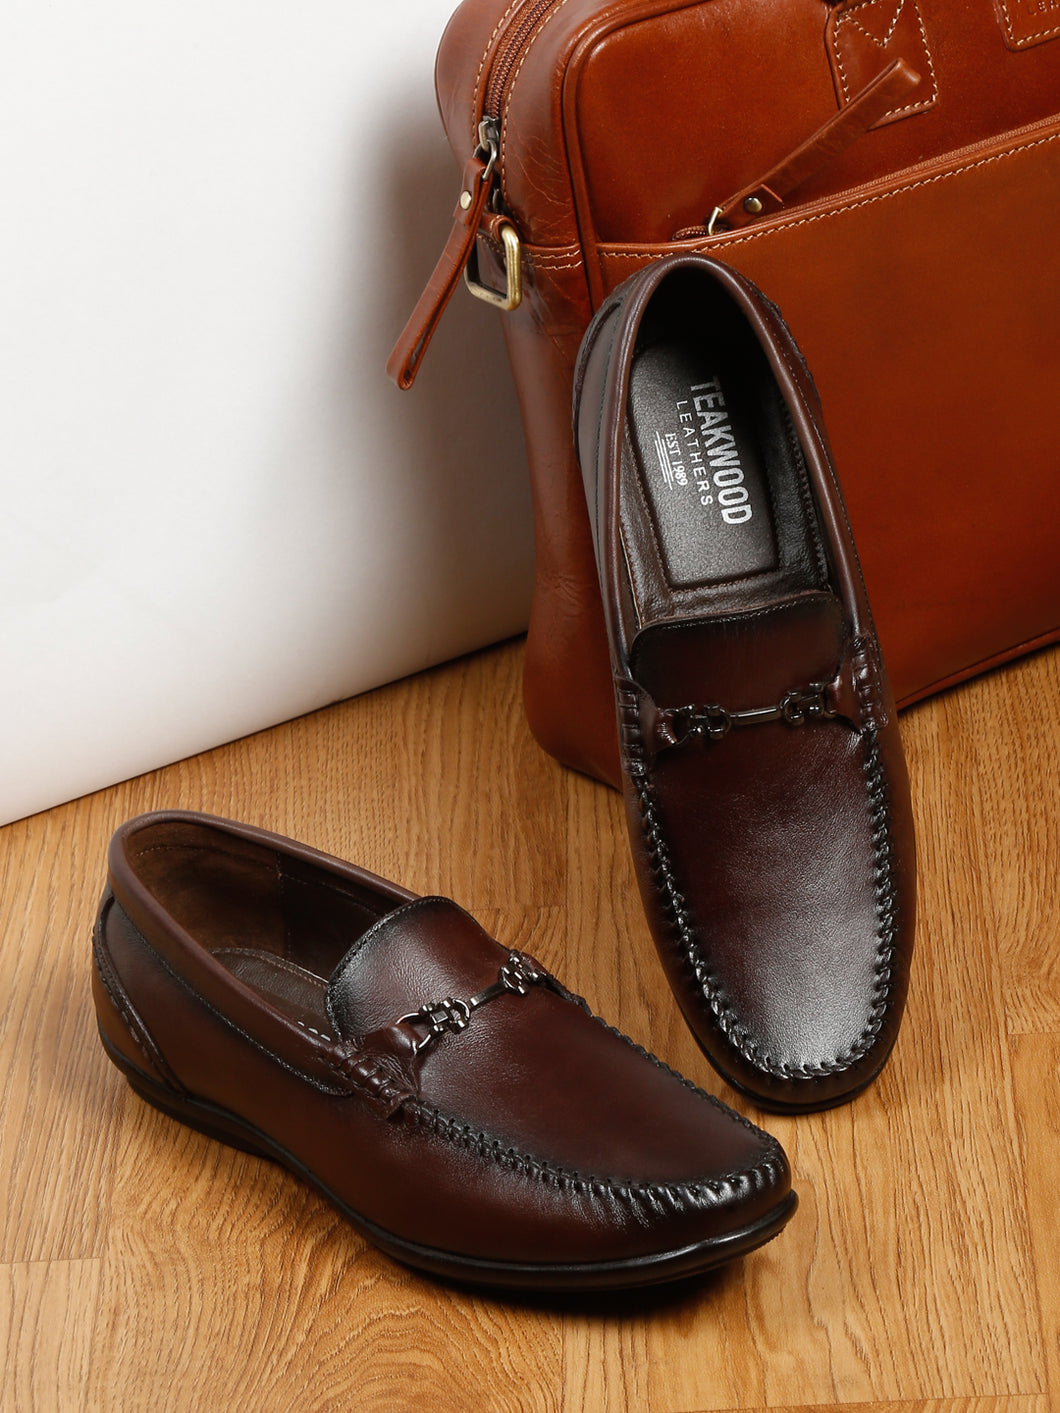 Men Classic Brown Leather Loafers shoes